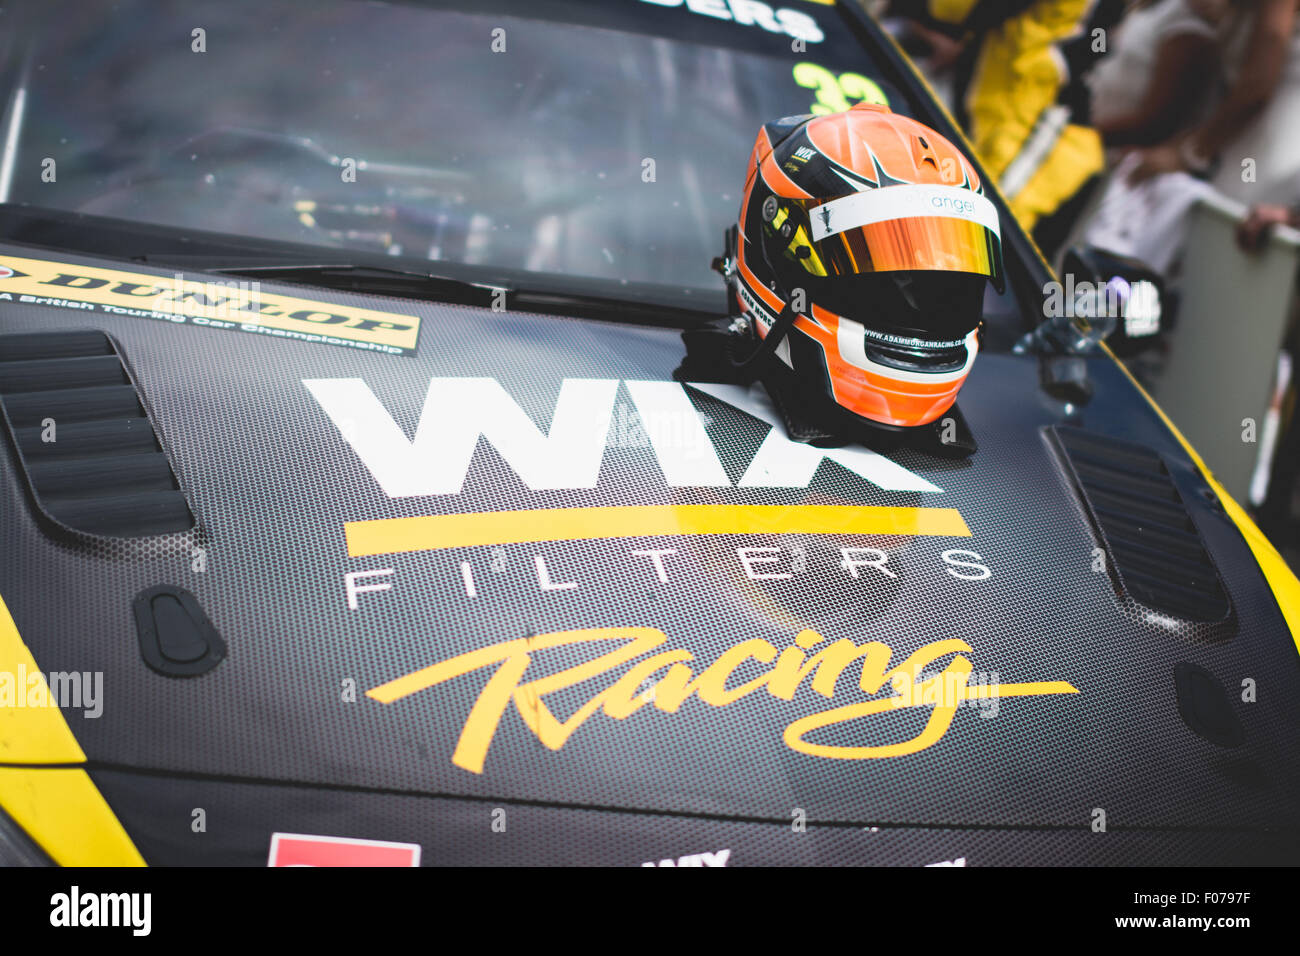 Norwich, Norfolk, UK. 09th Aug, 2015. A detail view of the front of the WIX Filters Racing sign seen on the WIX Racing's Mercedes Benz A-Class, driven by Adam Morgan during the Dunlop MSA British Touring Car Championship at Snetterton Circuit on August 9, 2015 in NORWICH, NORFOLK, UNITED KINGDOM (Photo by Gergo Toth / Alamy Live News) Credit:  Gergo Toth/Alamy Live News Stock Photo